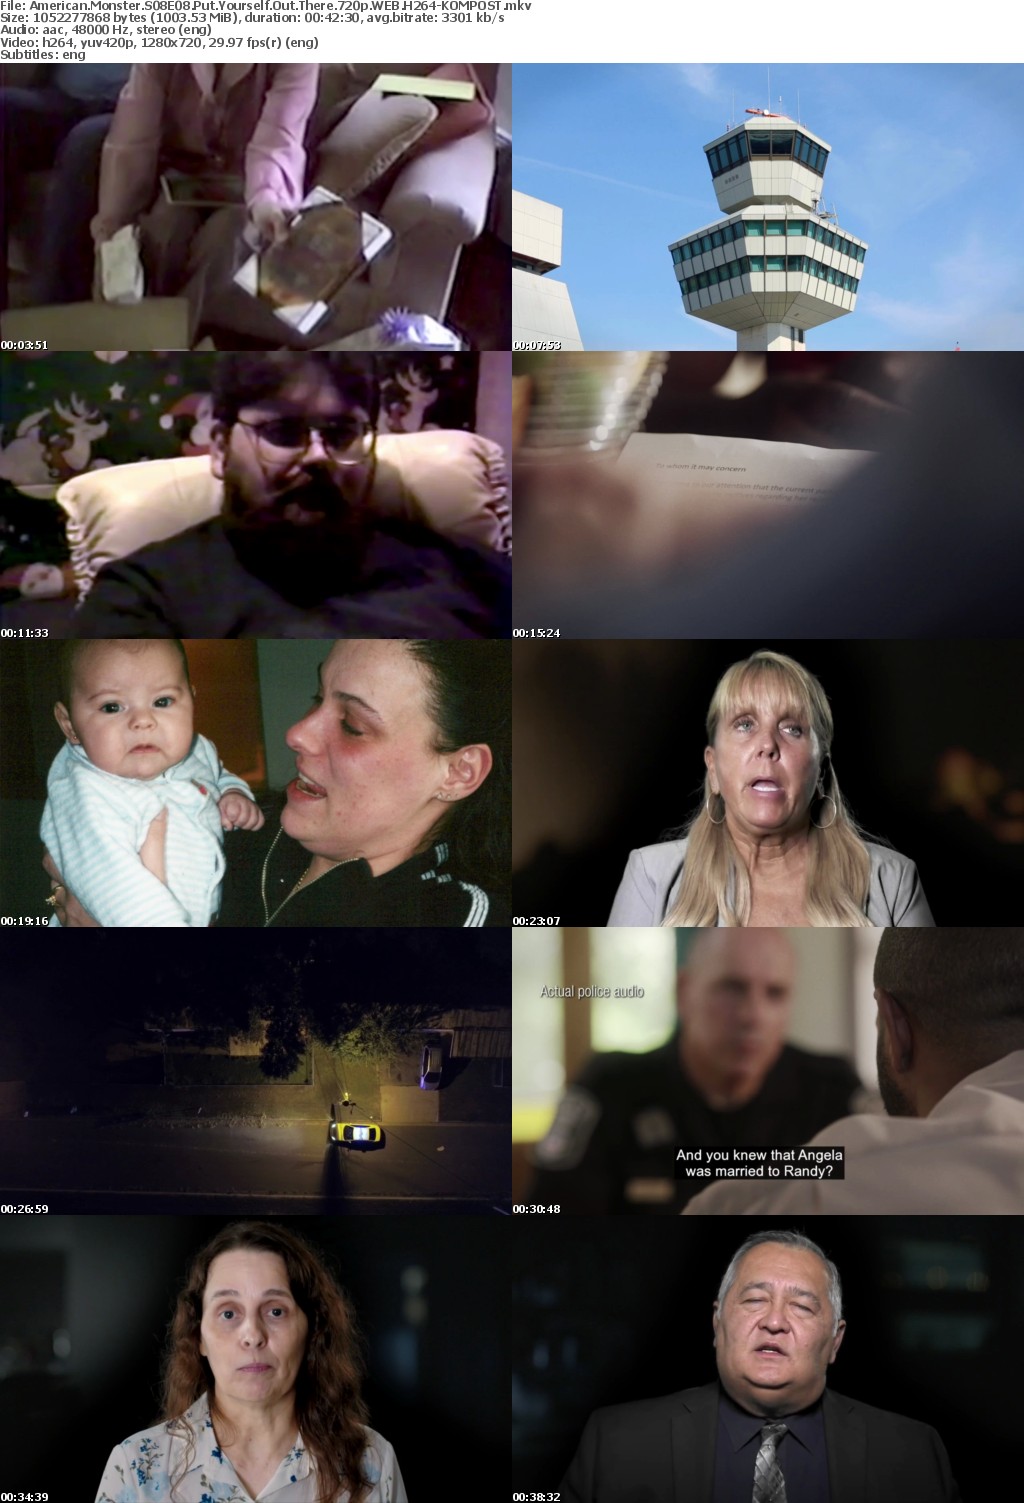 American Monster S08E08 Put Yourself Out There 720p WEB H264-KOMPOST